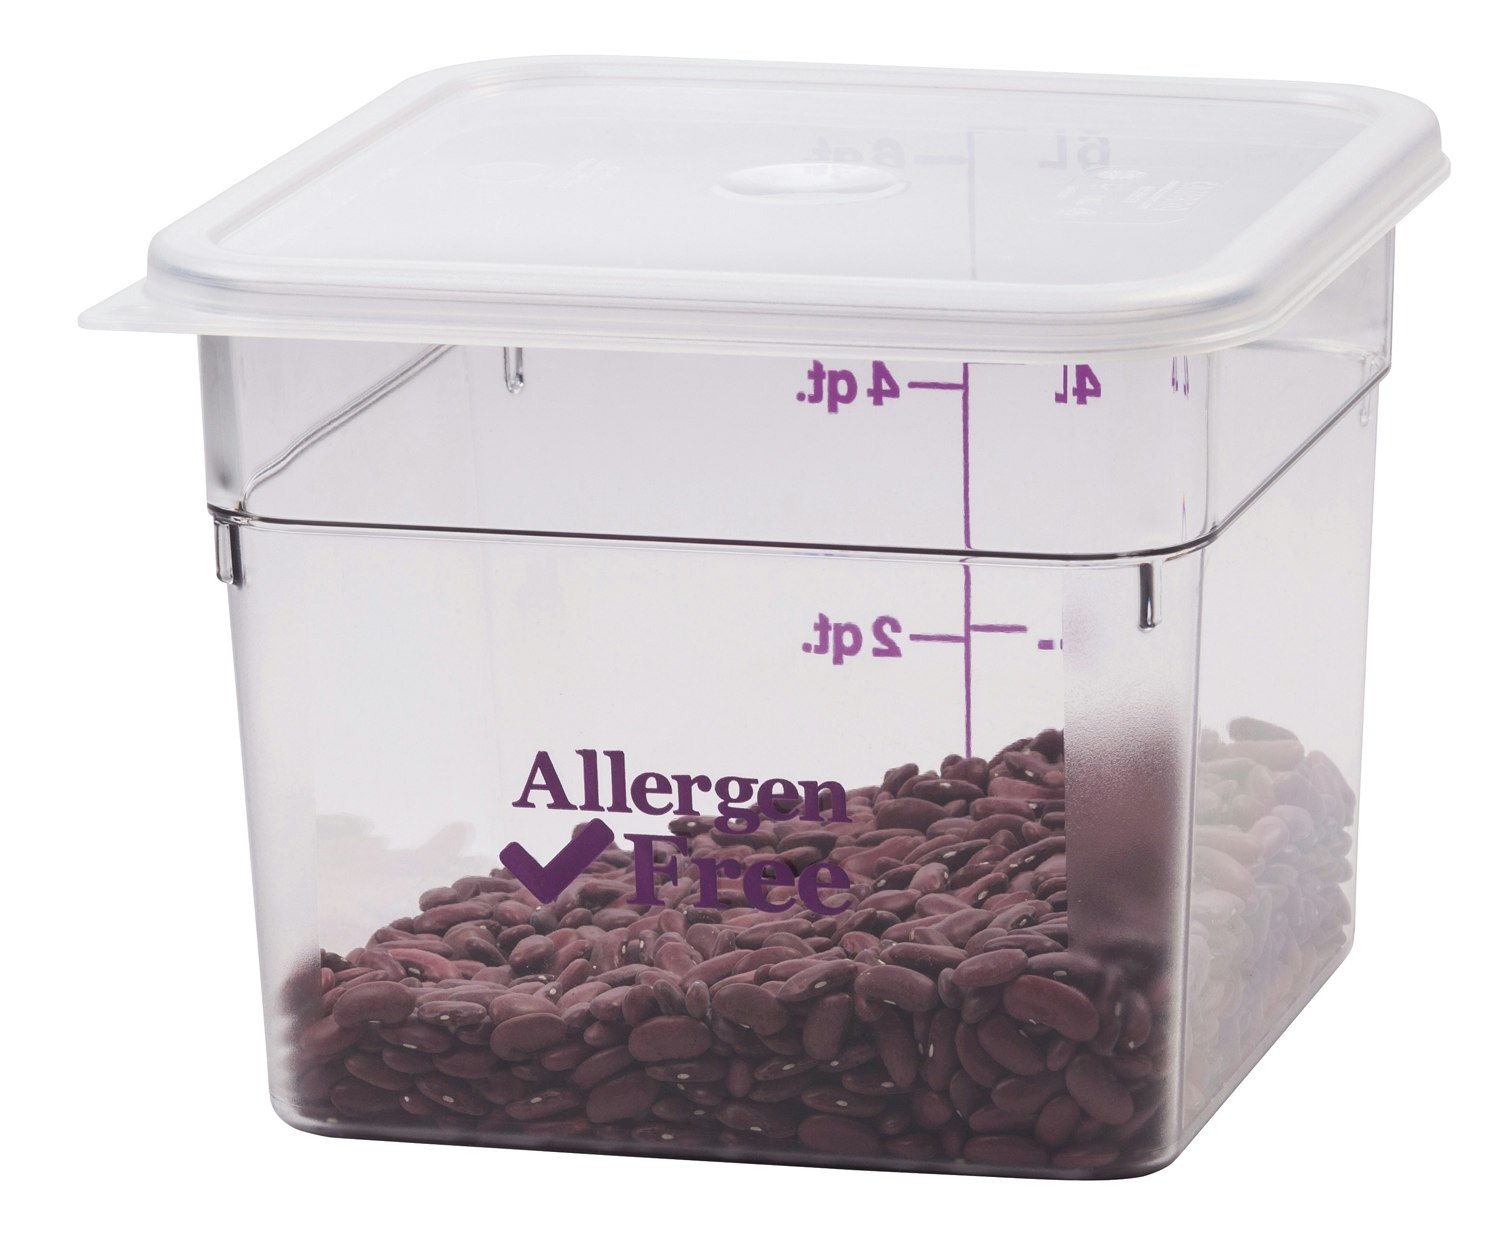 Vigor 2 Qt. Allergen-Free Clear Square Polycarbonate Food Storage Container  and Purple Lid - 3/Pack